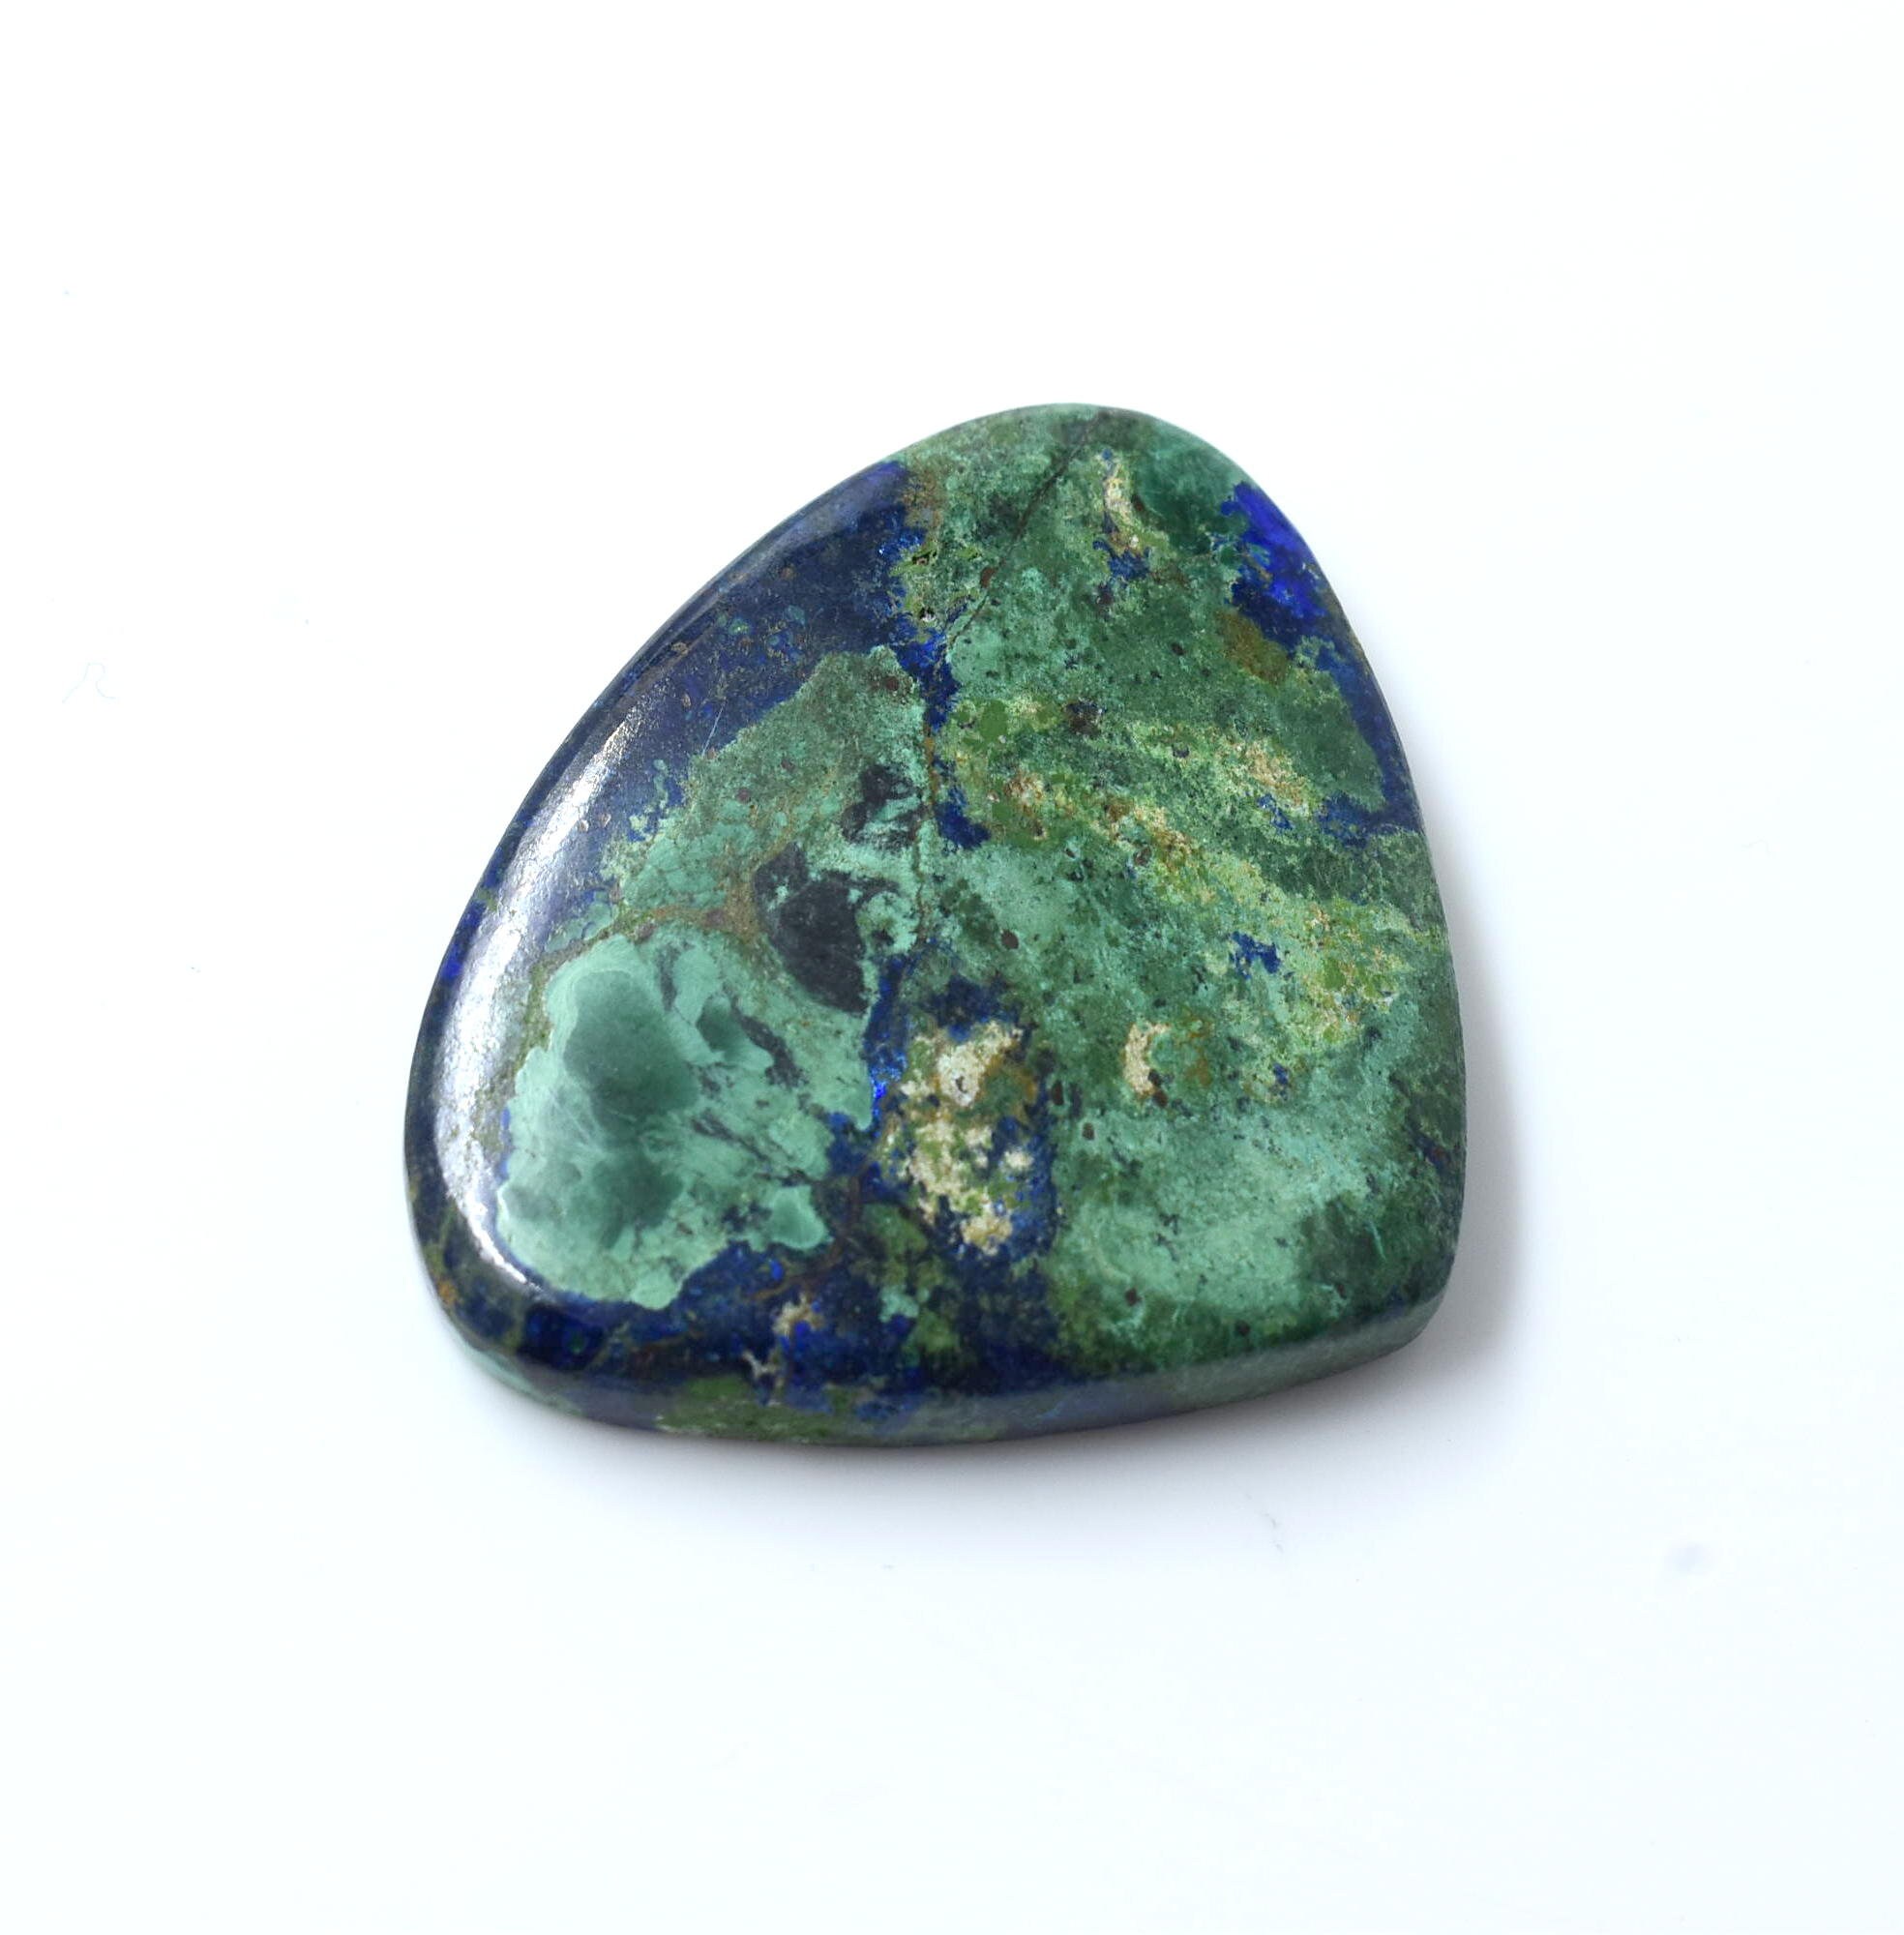 100% Natural Azurite Malachite Cabochon Good quality stone Beautiful Art Making for jewellery Ring 78.75 CARAT 33X40X6 MM | Save 33% - Rajasthan Living 14